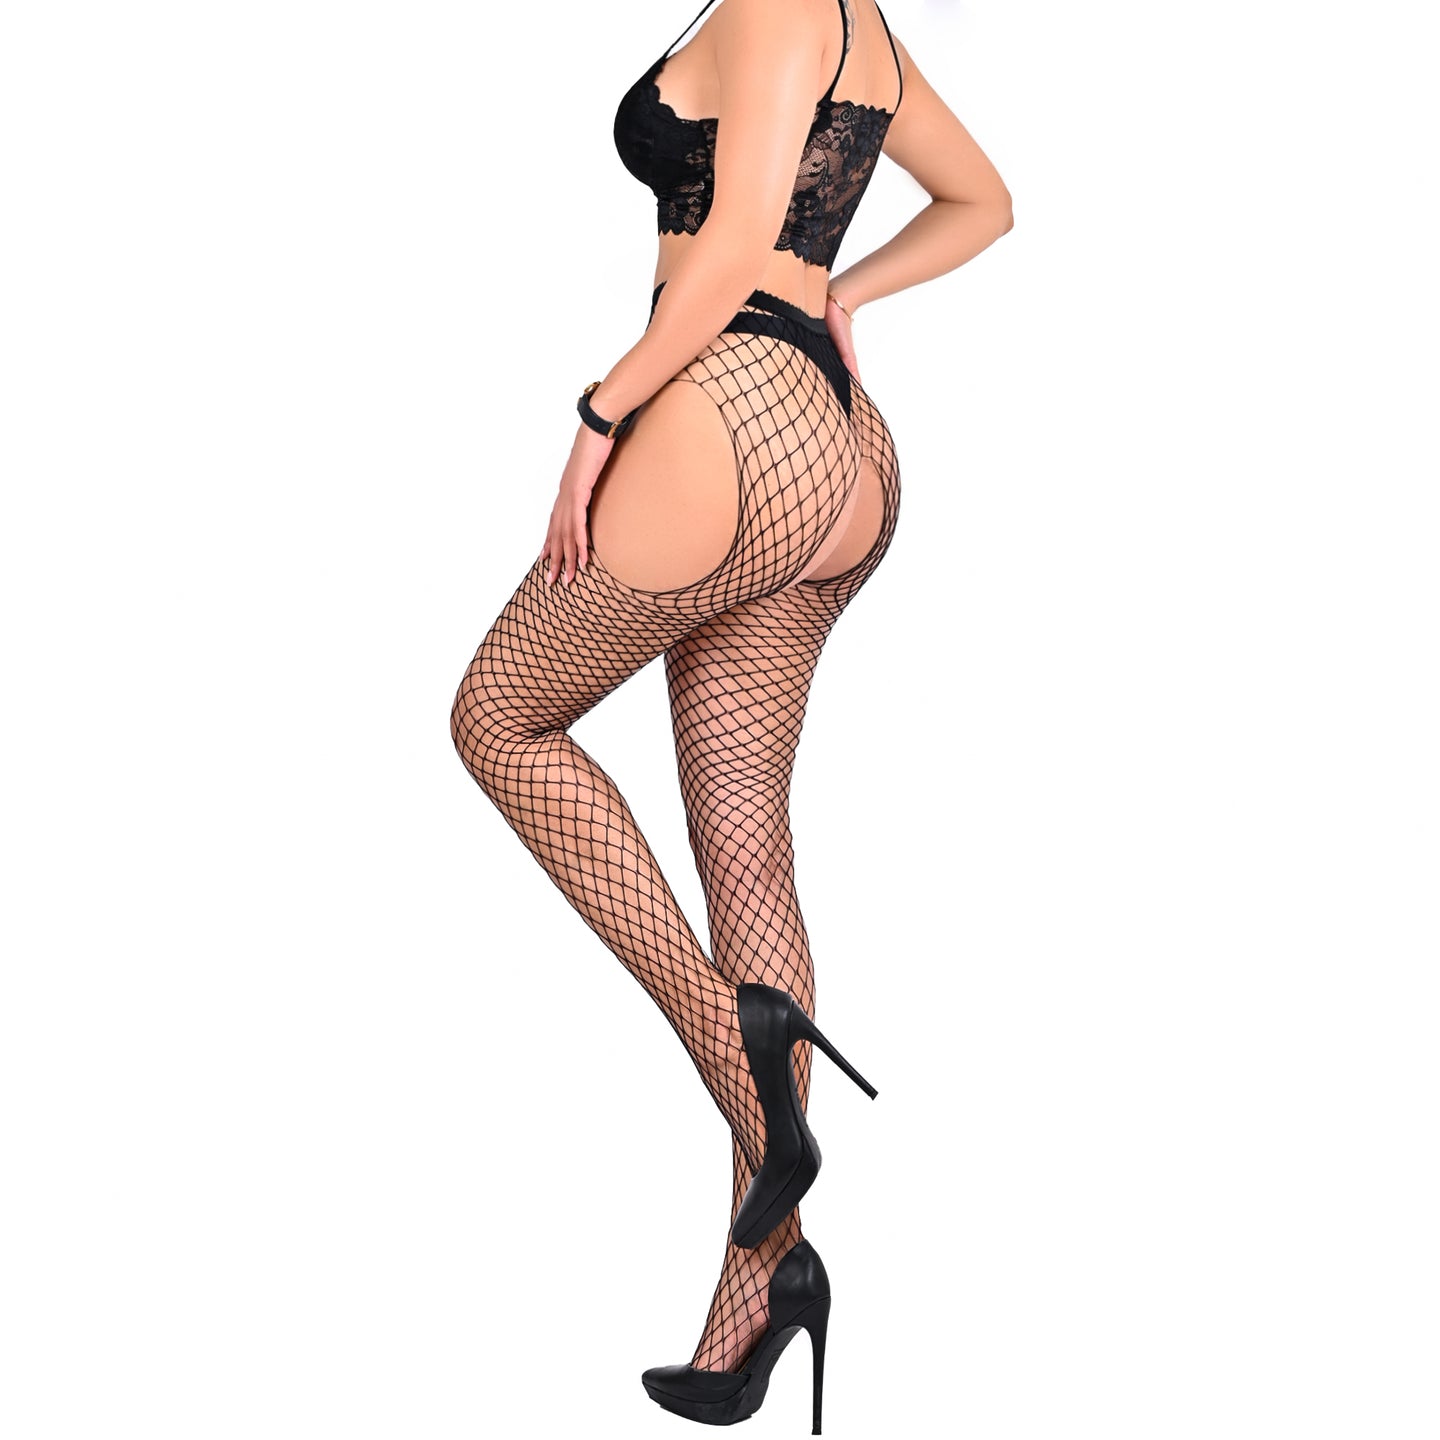 Ouvert Tights Hold-Up Suspender Belt Stockings - Fishnet Stockings with Jacquard Lace Waistband, One Size, Open Crotch (1 Piece)